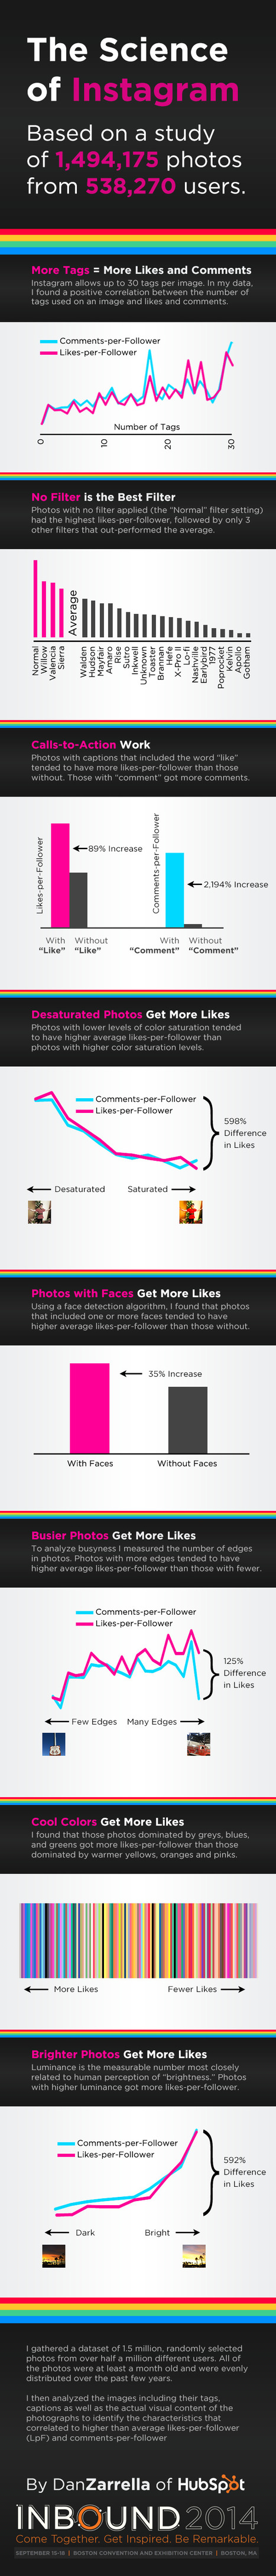 The Science of Instagram [infographic] | MarketingHits | Scoop.it